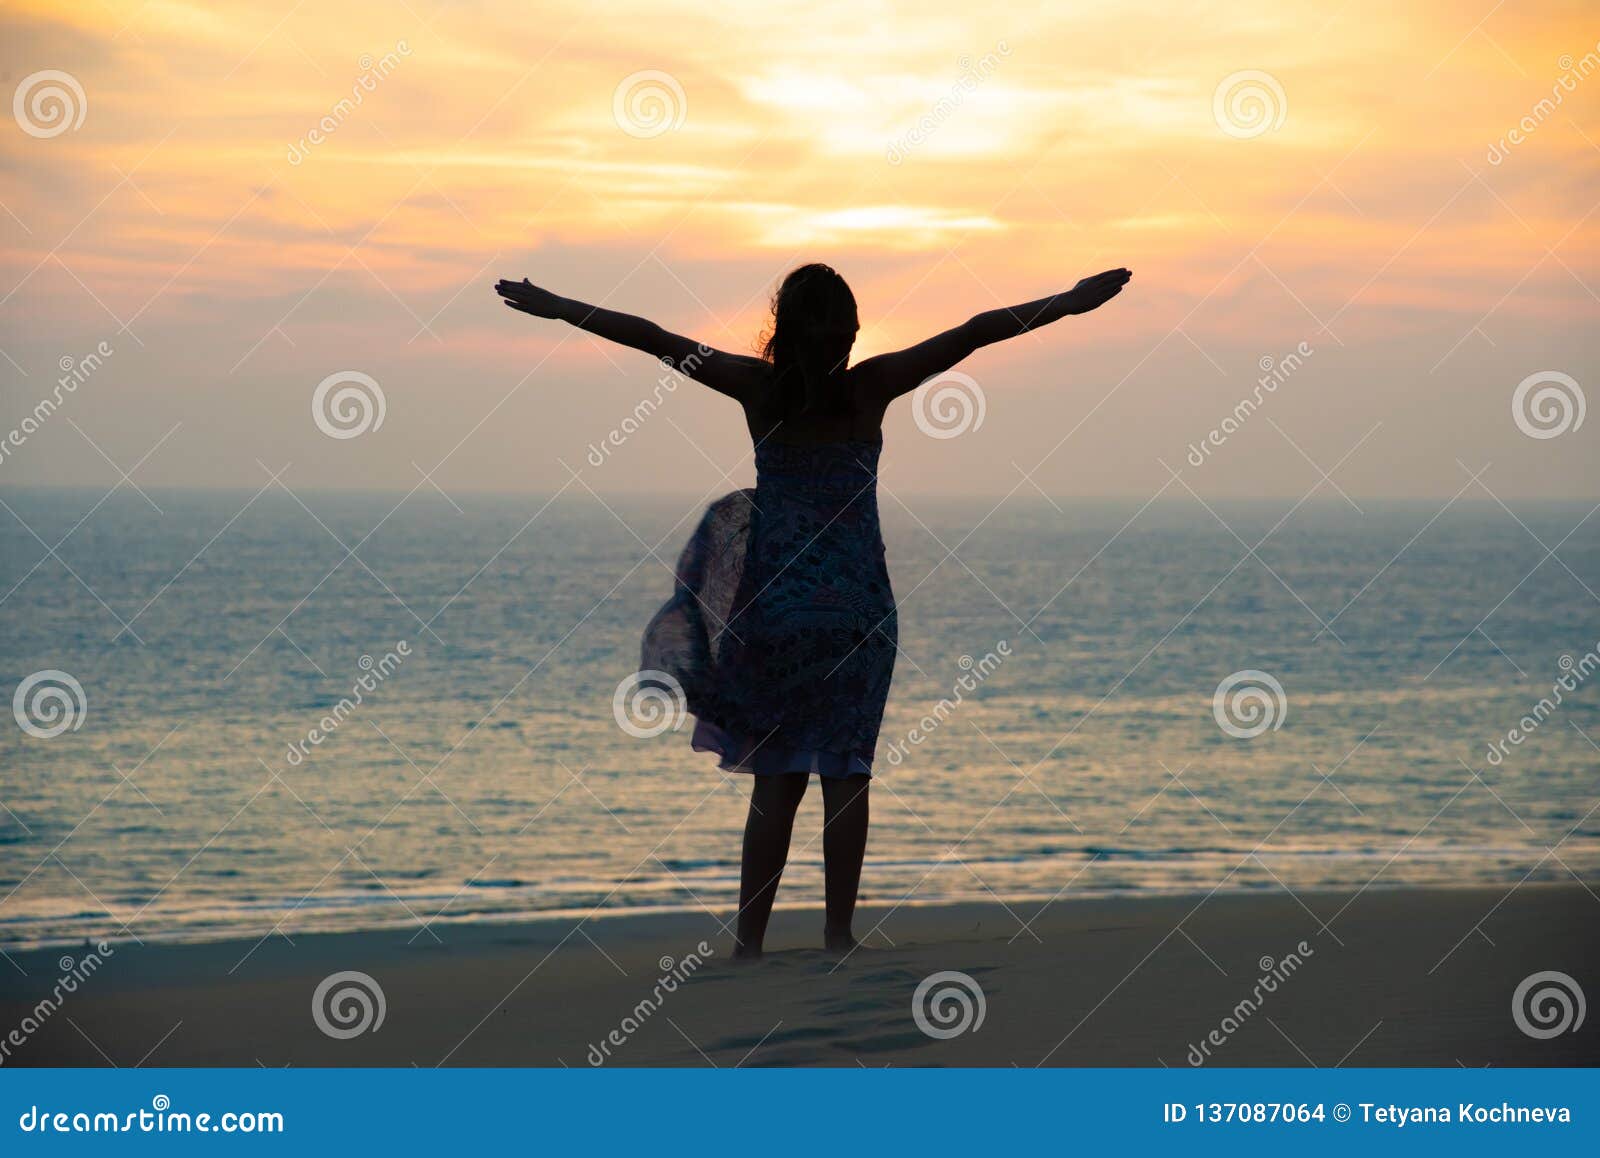 Silhouette of Freedom and Happy Girl on Beach Stock Photo - Image ...